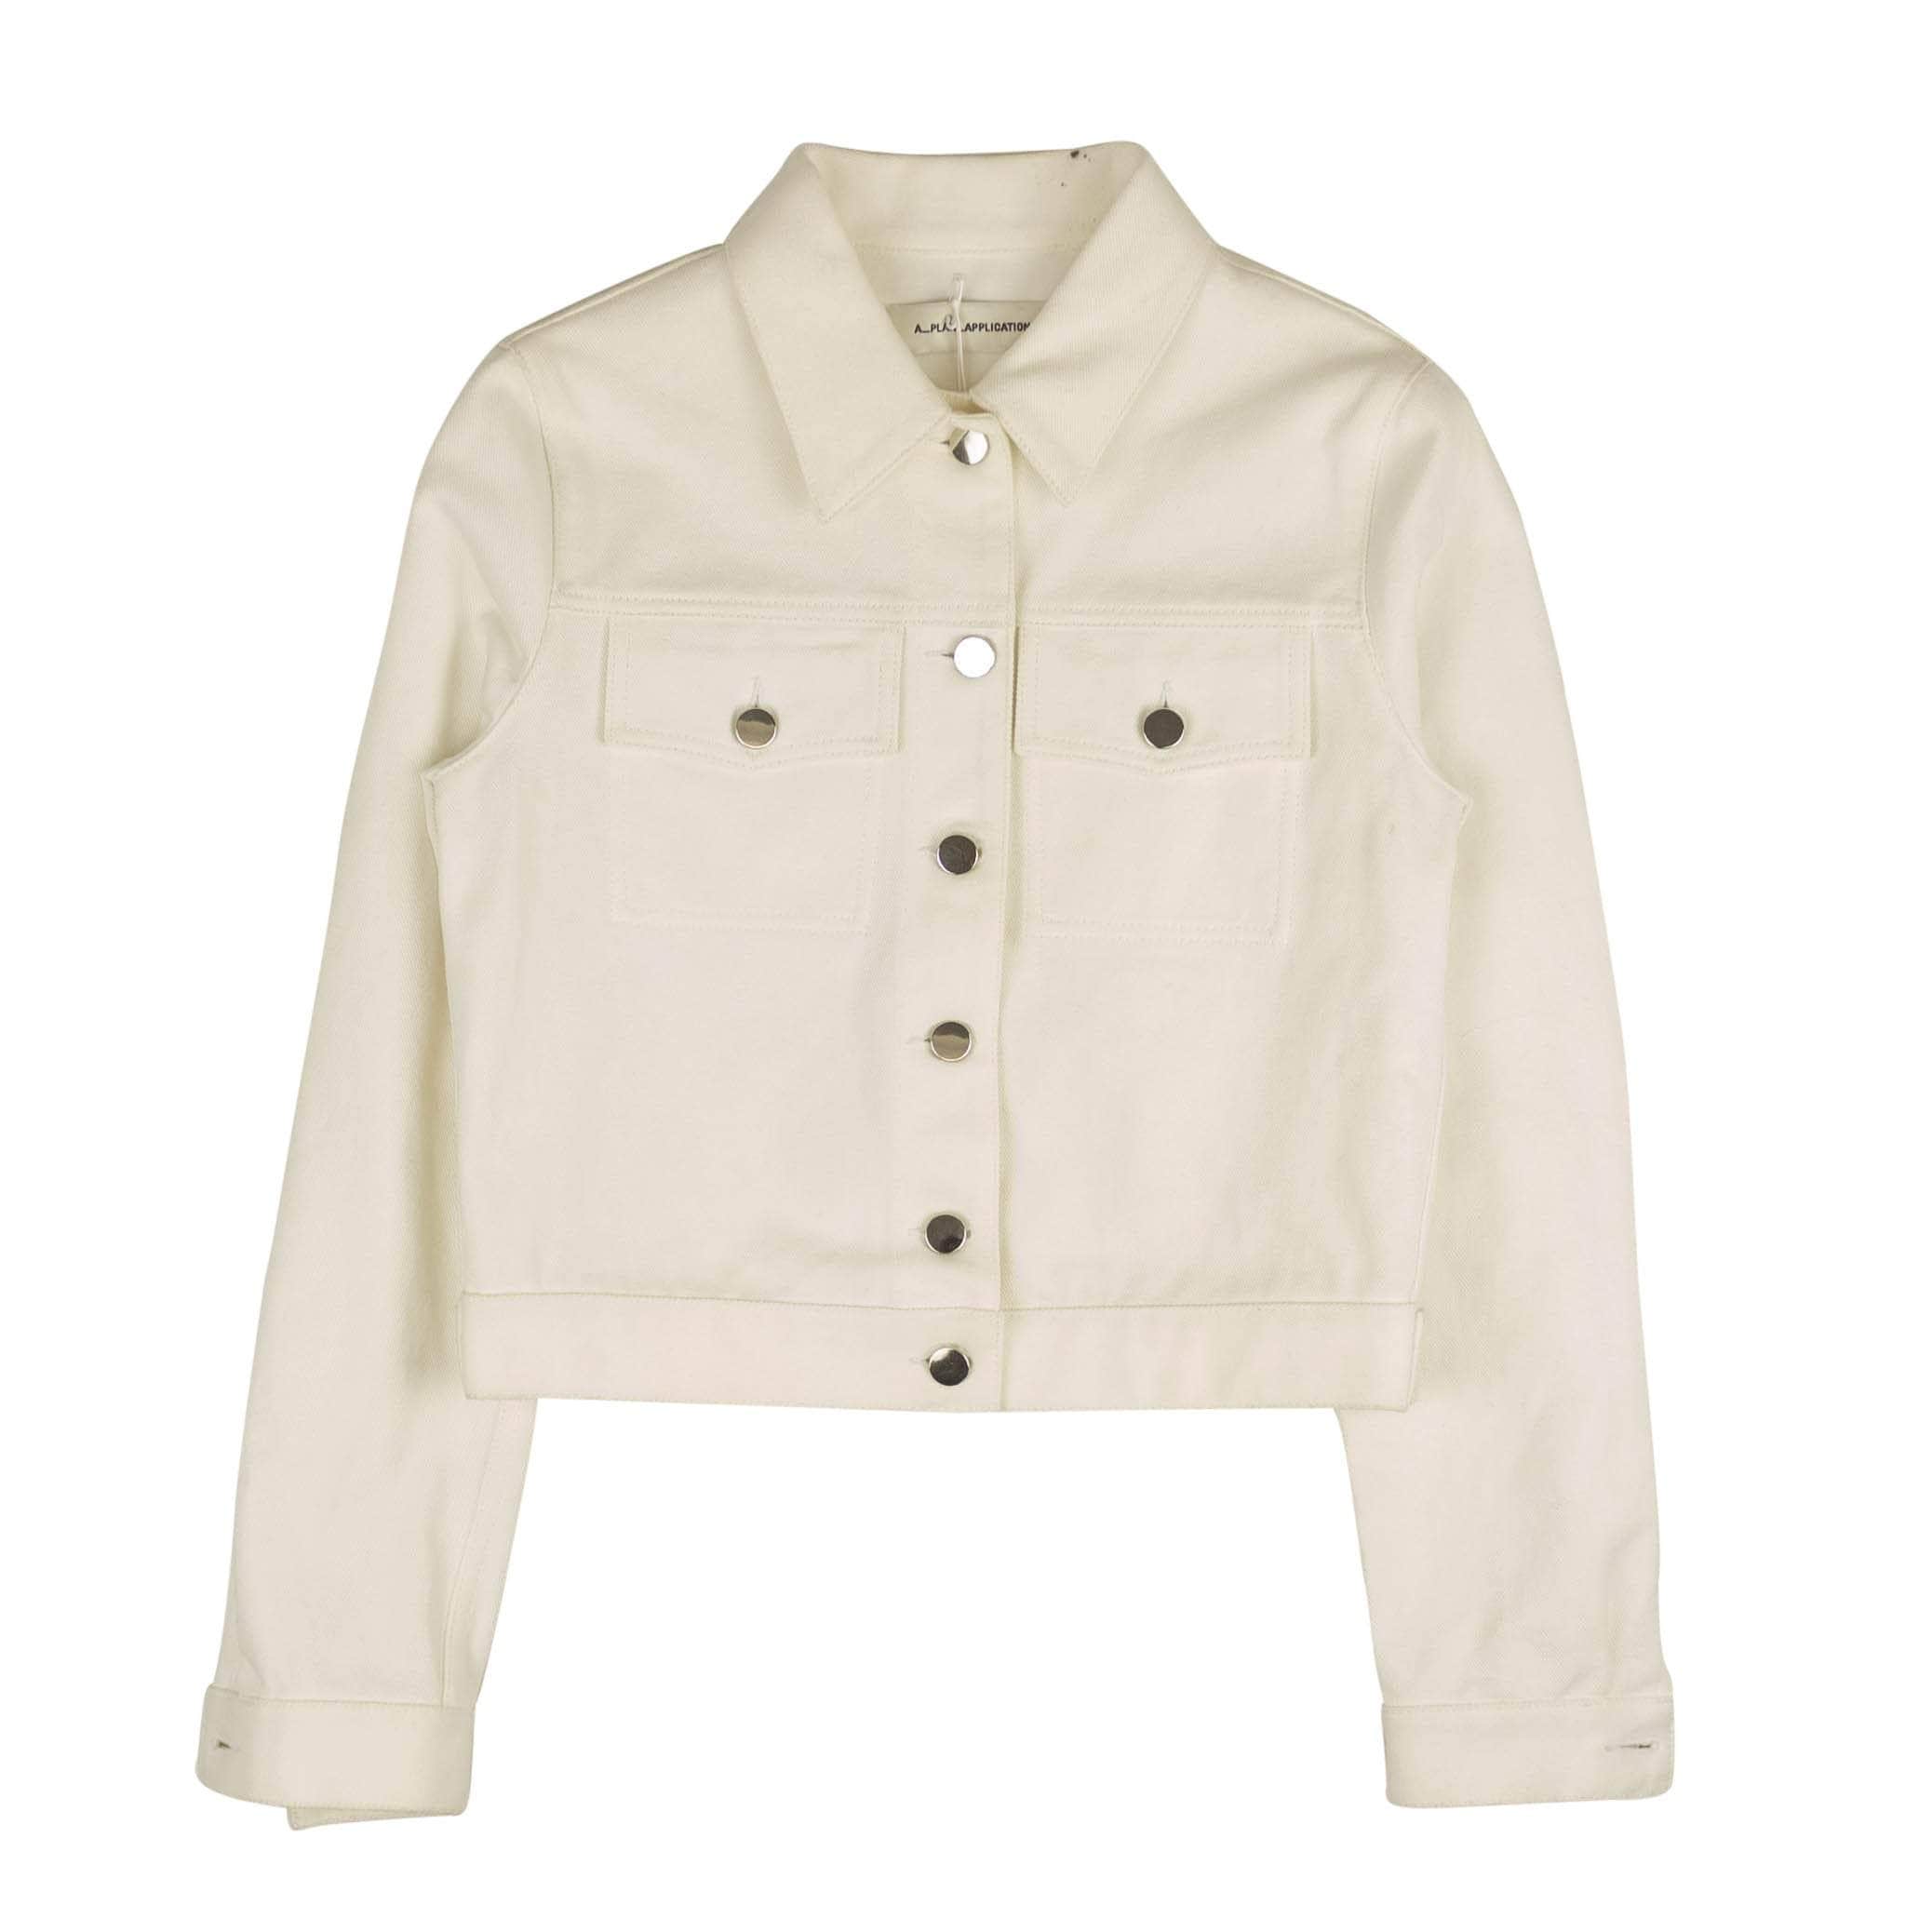 A_Plan_Application 250-500, a_plan_application, channelenable-all, chicmi, couponcollection, gender-womens, main-clothing, size-s, womens-denim-jackets S White Caban Denim Jacket 82NGG-AP-50/S 82NGG-AP-50/S